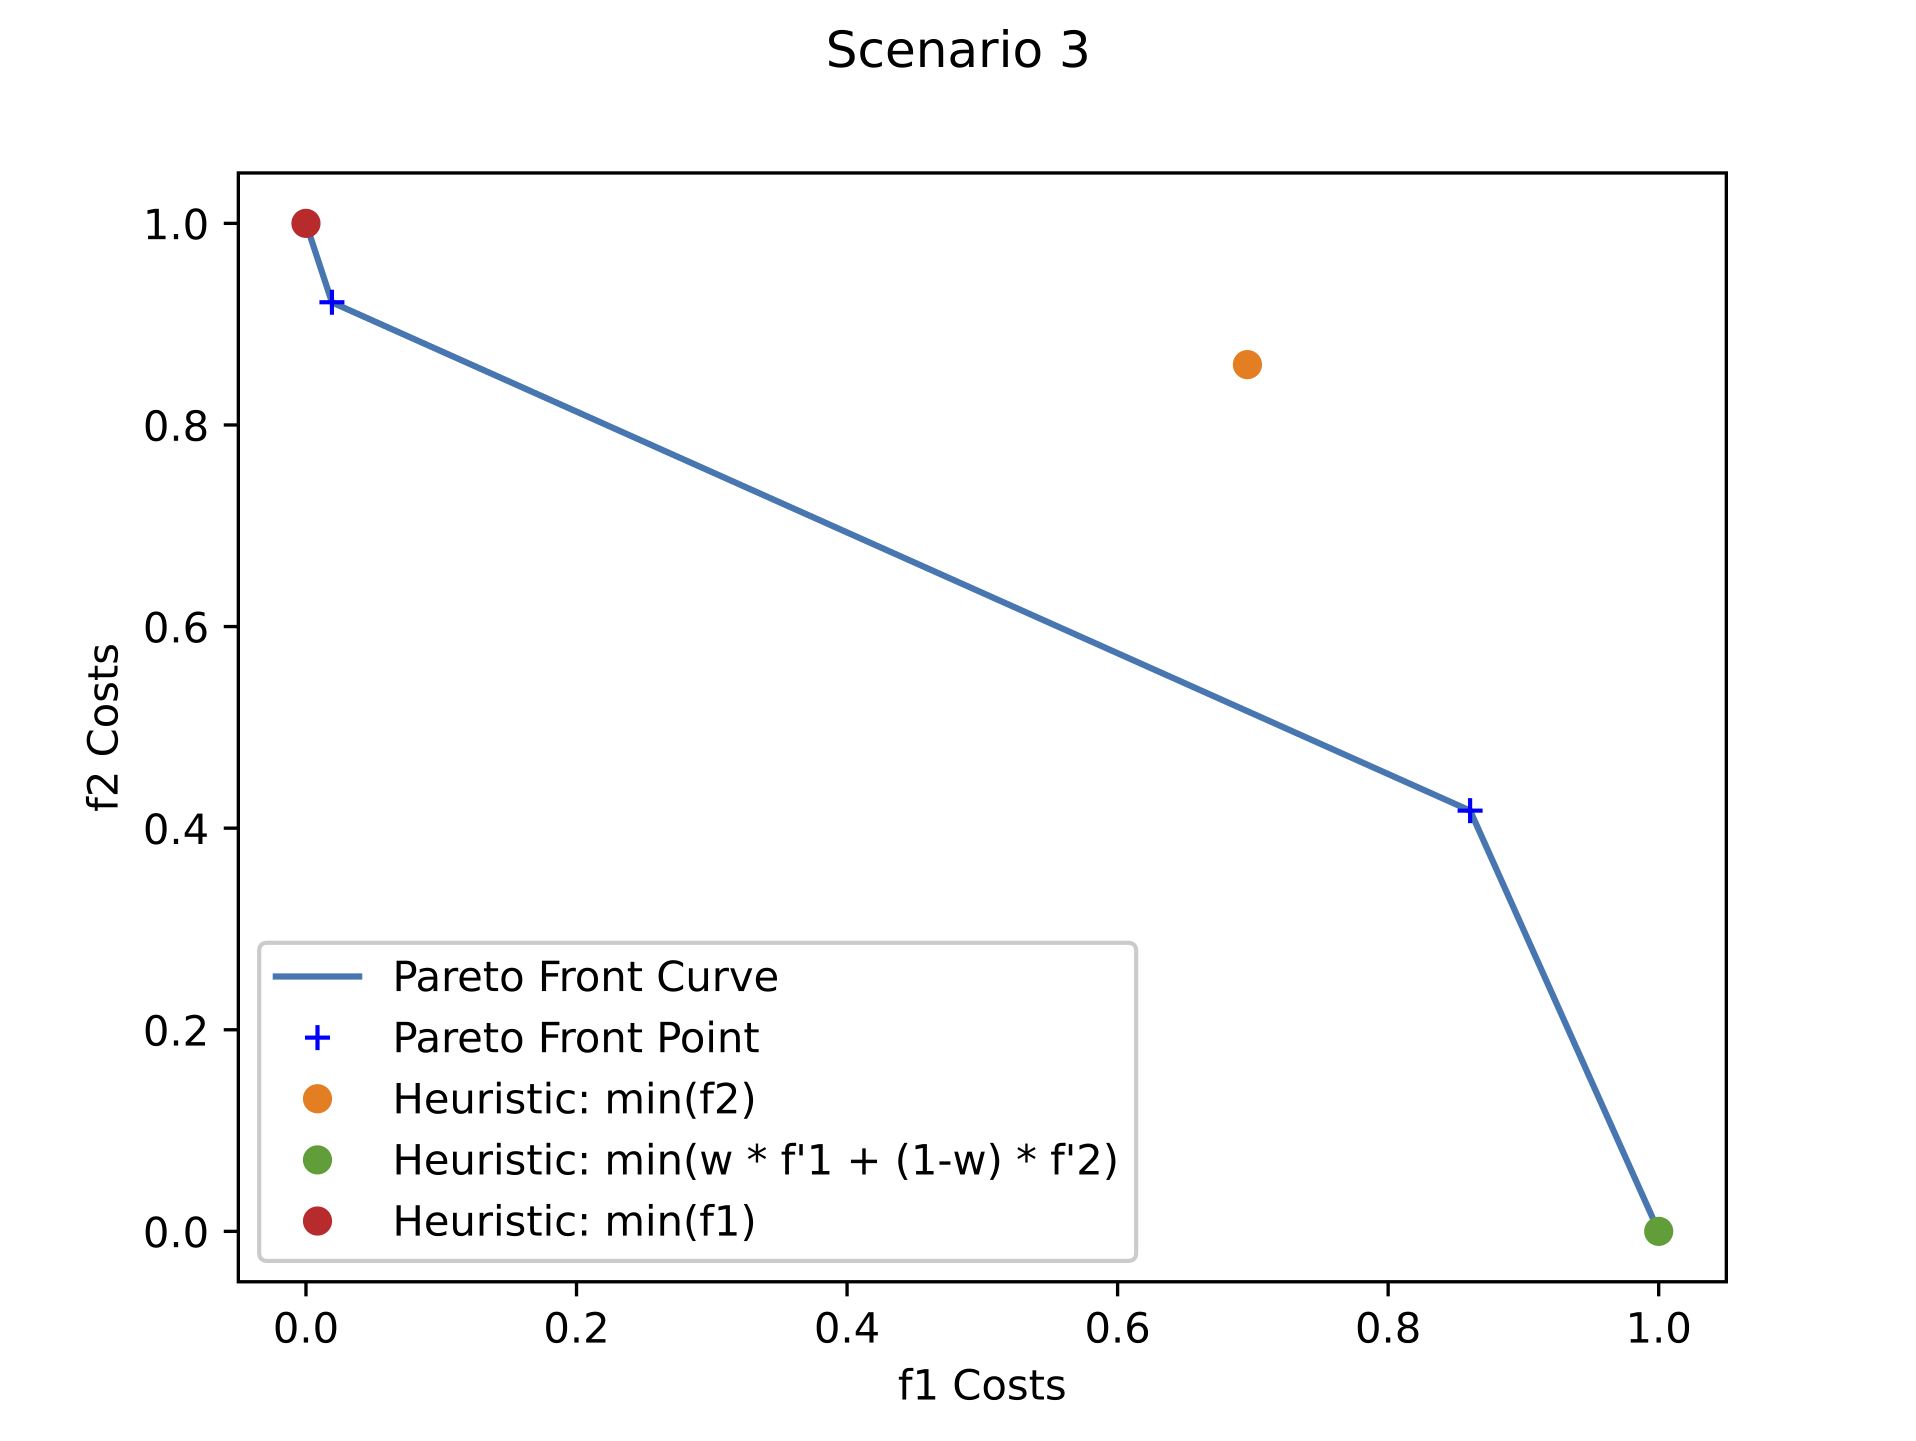 Pareto Fronts and Heuristic solutions for Scenario 3.